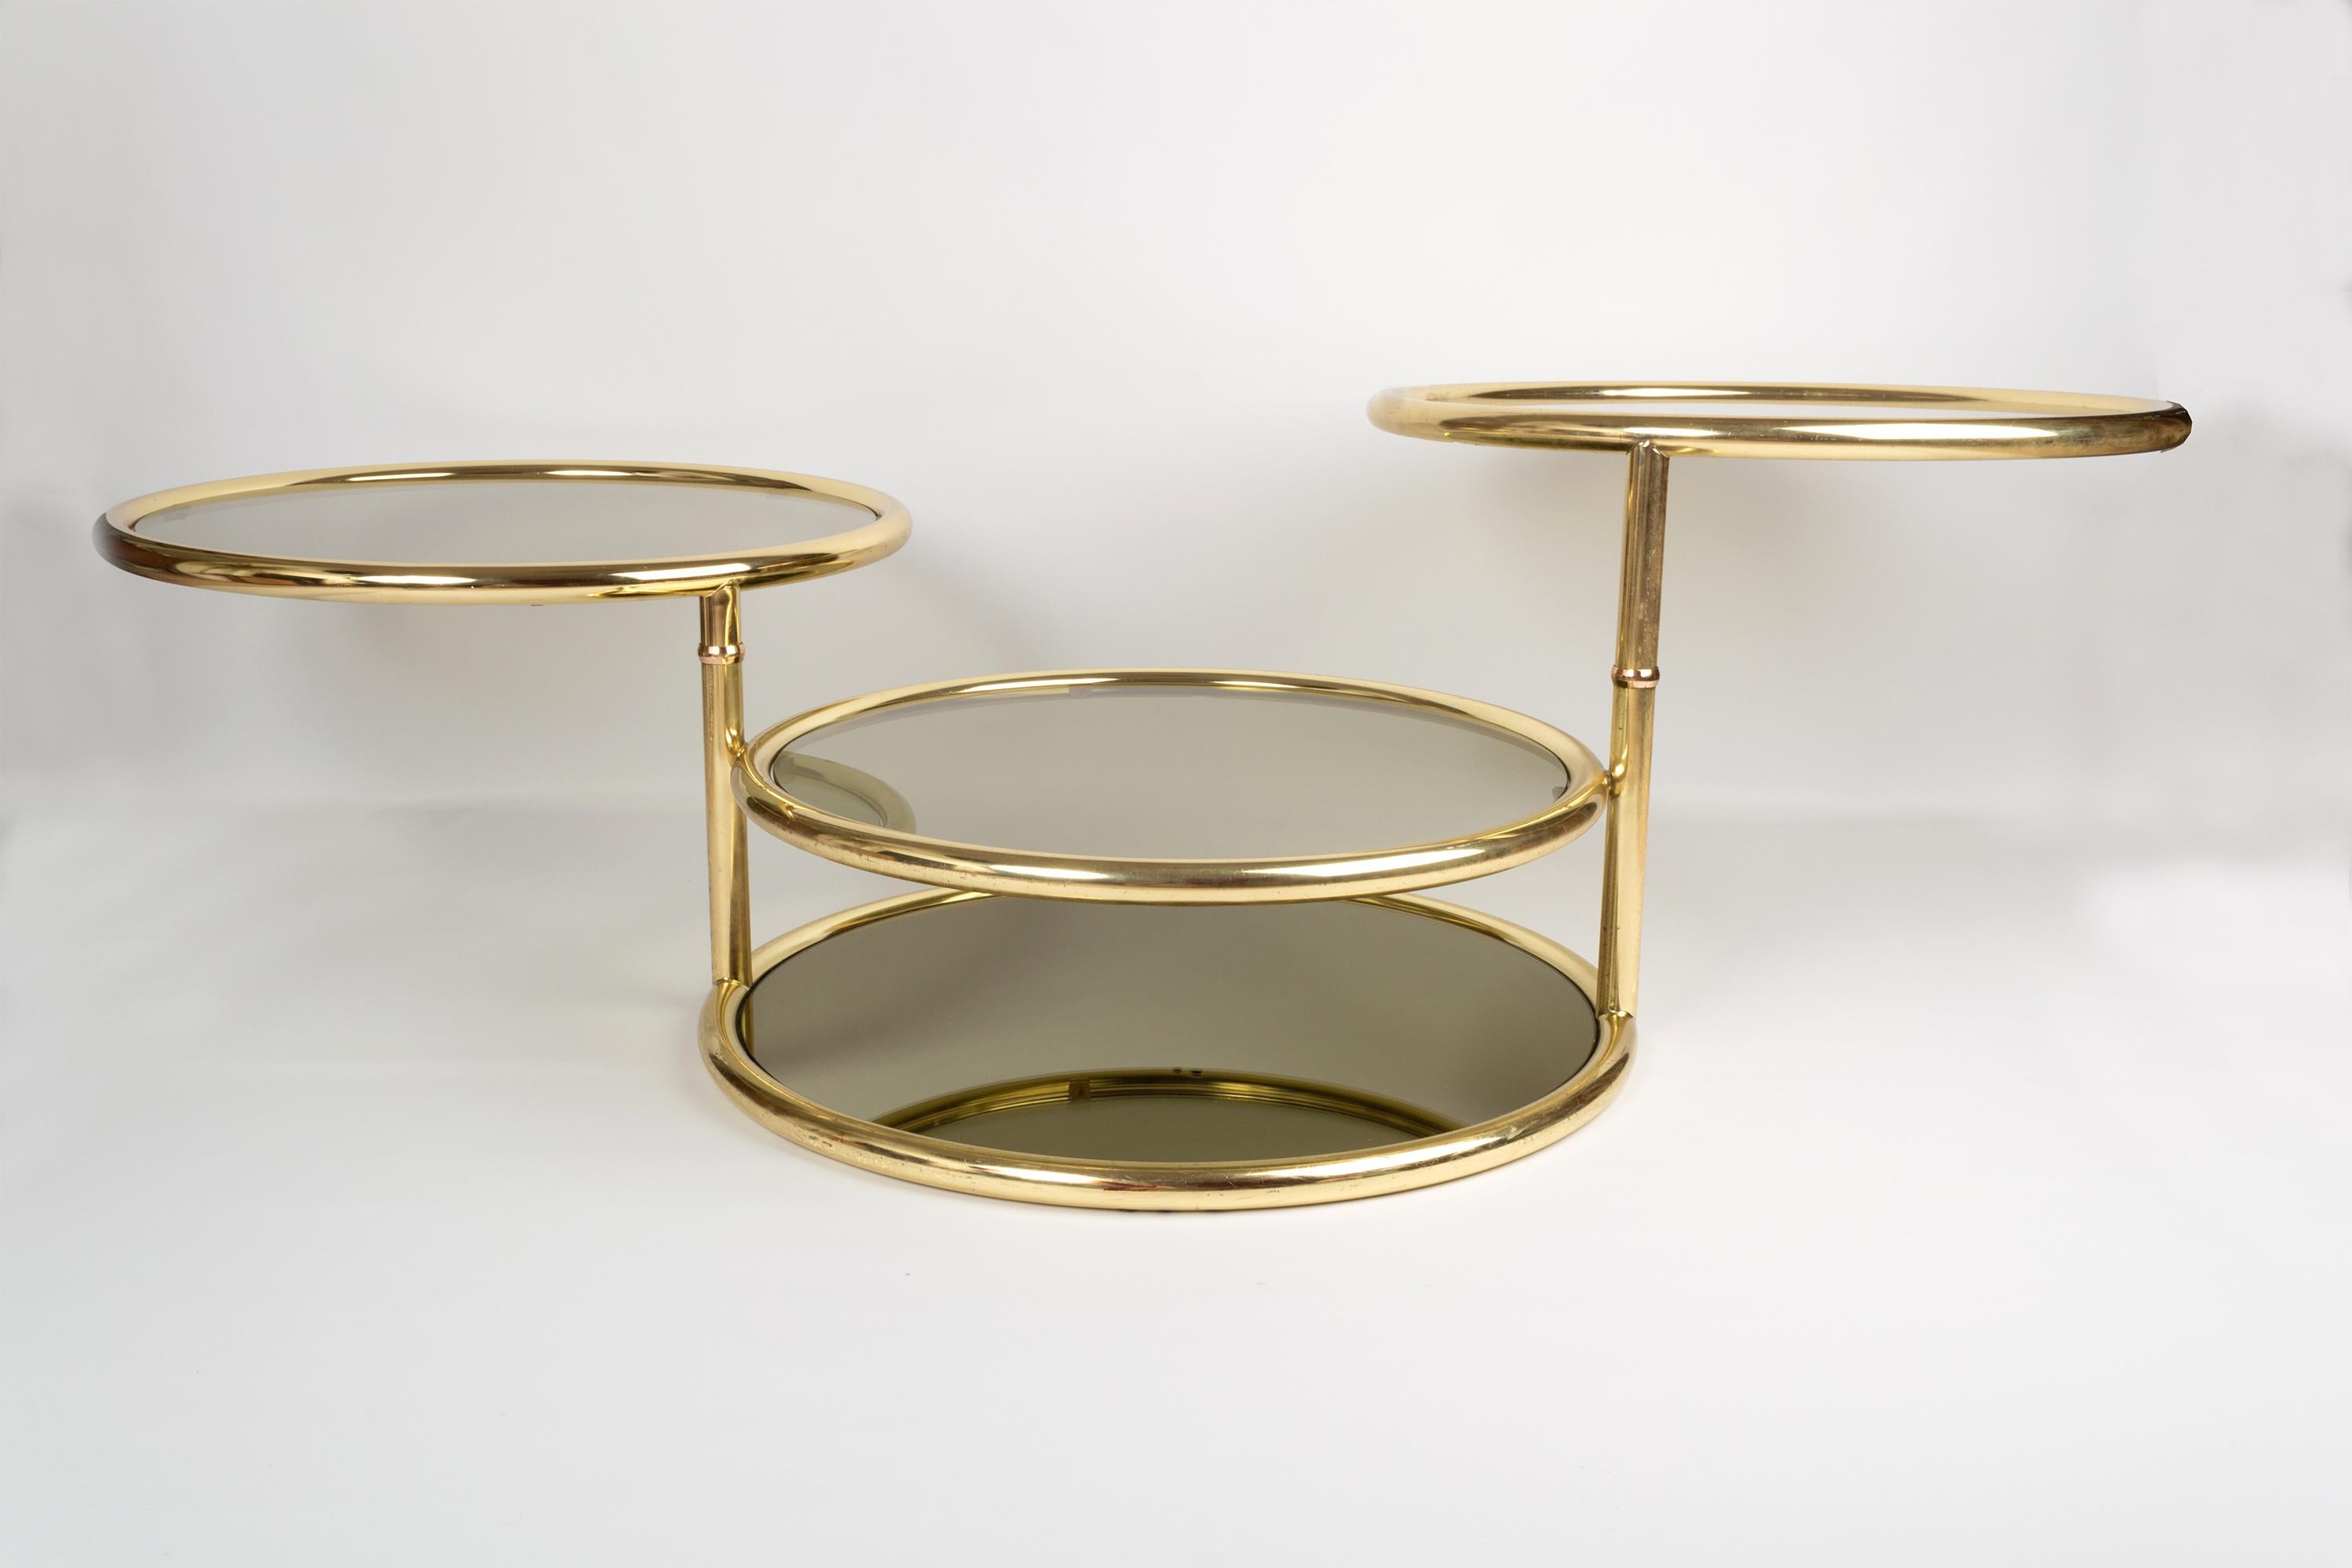 Midcentury Circular Brass Swivel Tiered Coffee Cocktail Table, attributed to DIA For Sale 6